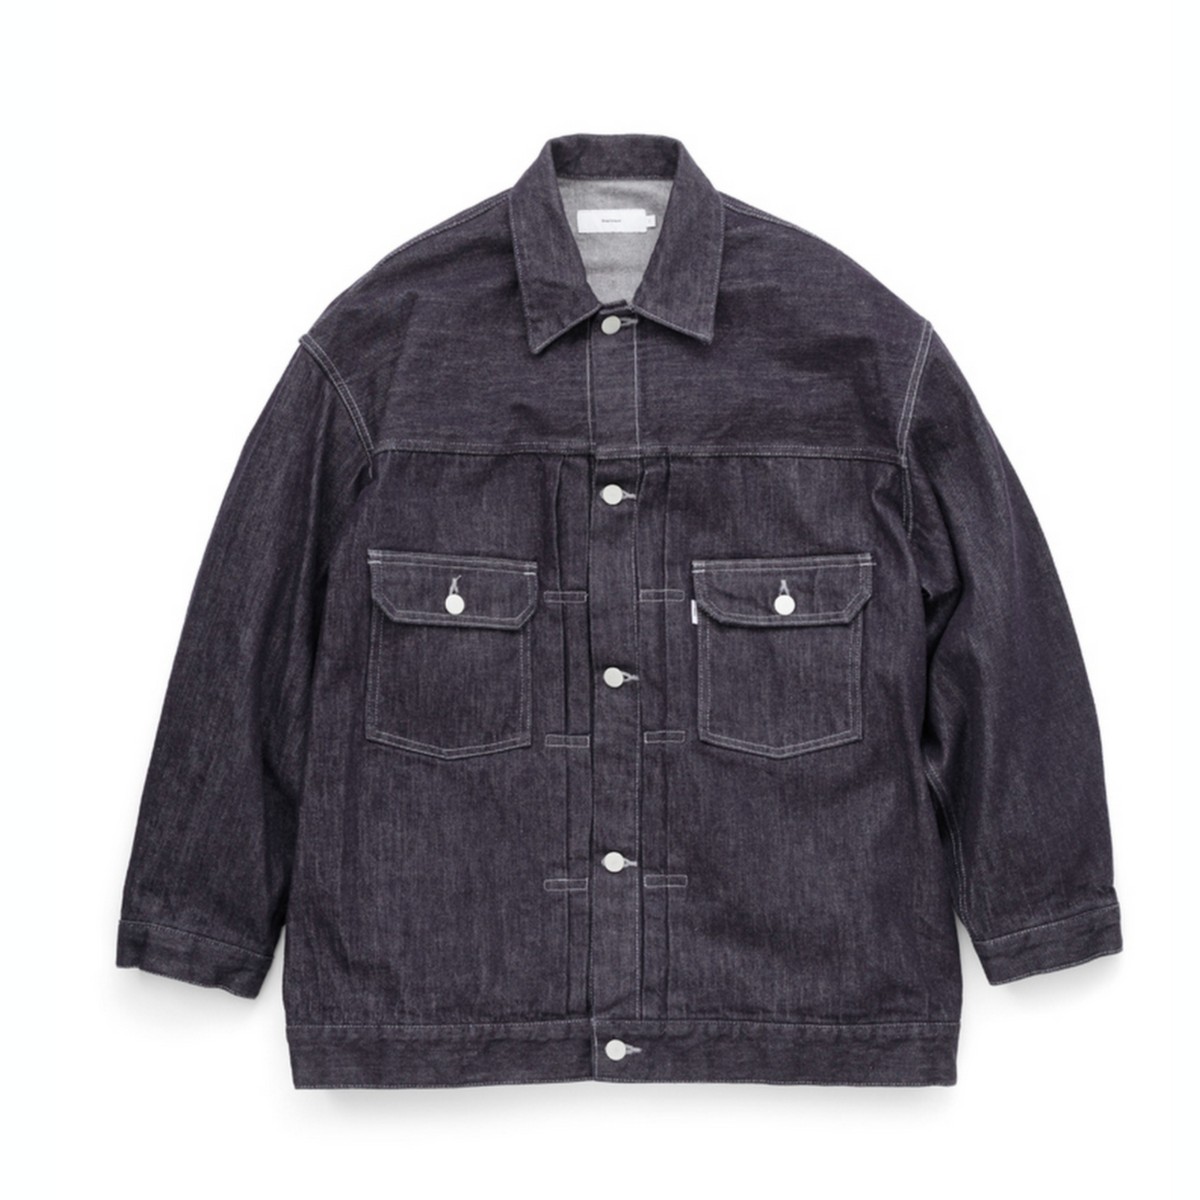 Graphpaper] Colorfast Denim Jacket – MaW SAPPORO